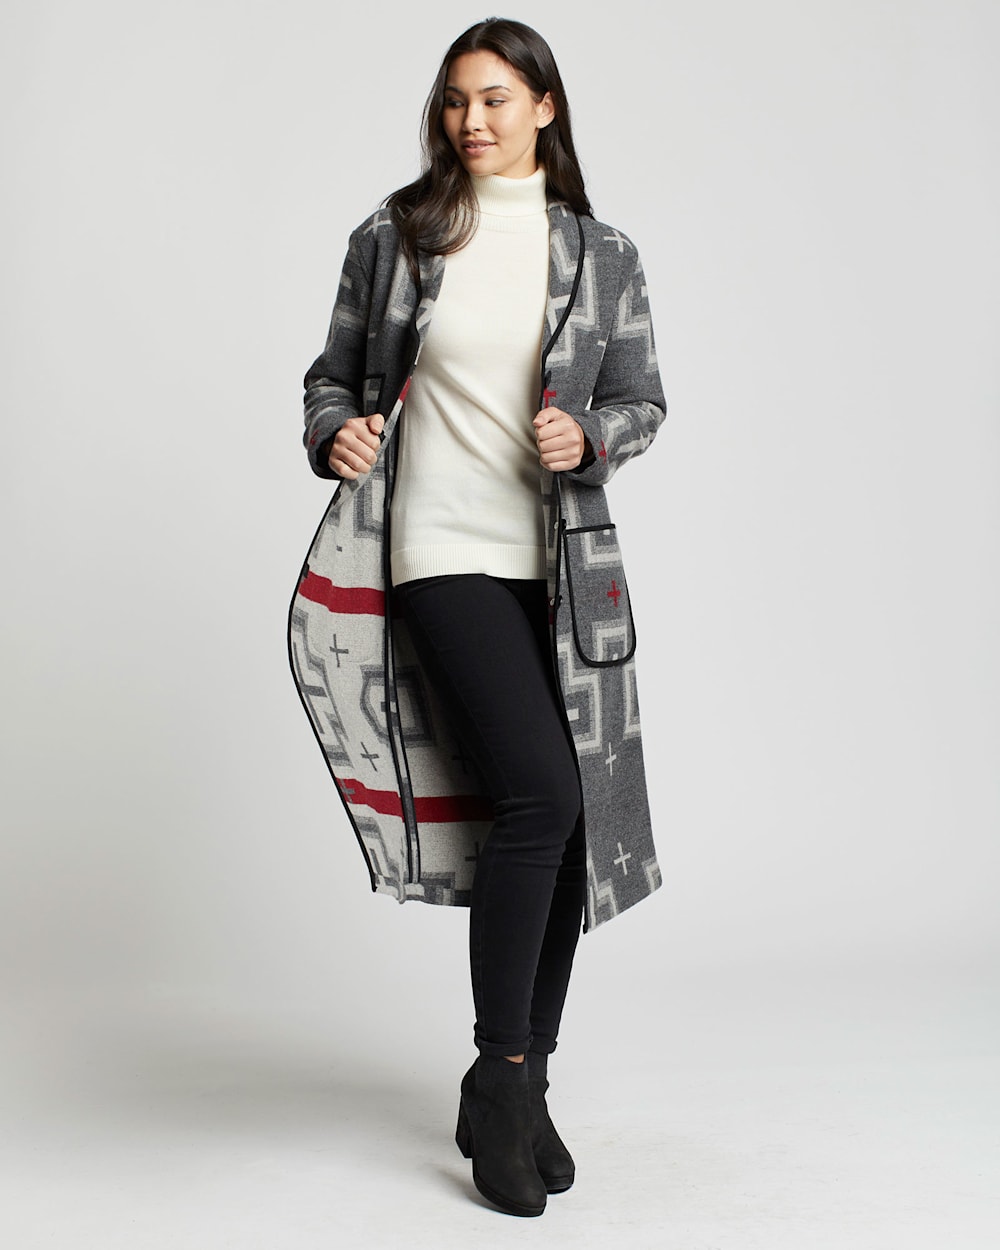 ALTERNATE VIEW OF WOMEN'S WOOL SHAWL-COLLAR DUSTER COAT IN GREY SAN MIGUEL image number 5